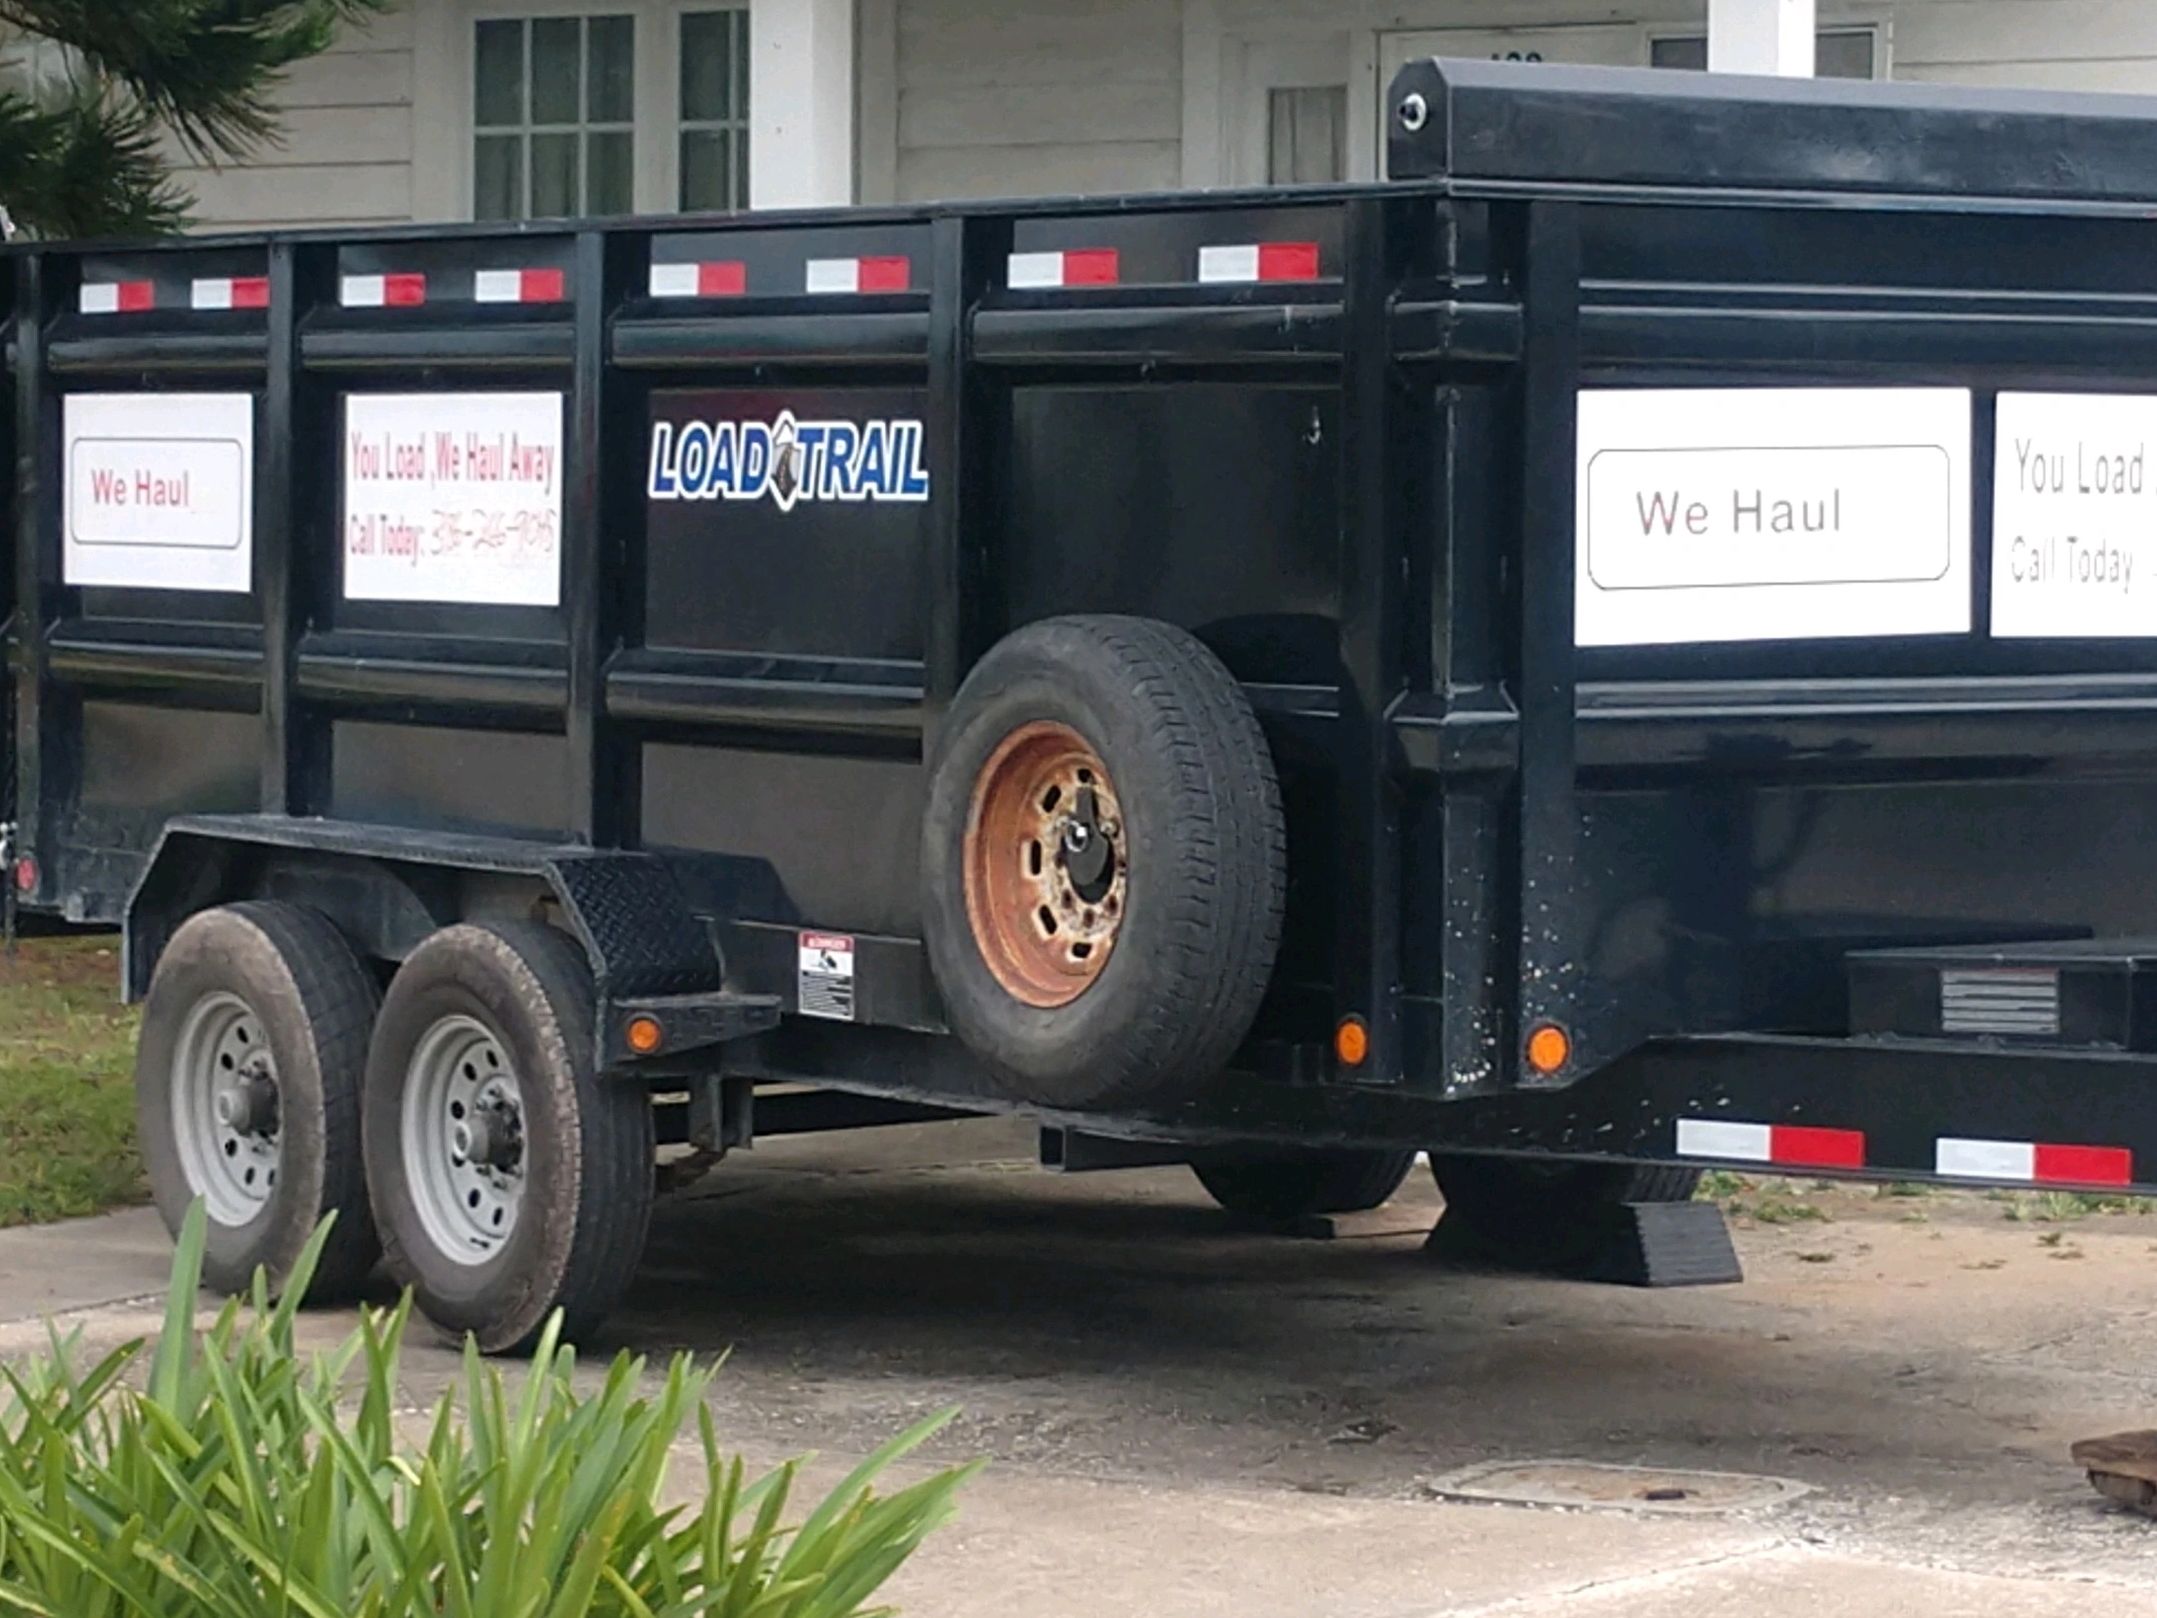 Dumpster Rentals. This 16 Yard Dumpster Is Driveway Friendly. Book Your Dumpster Rental Today.